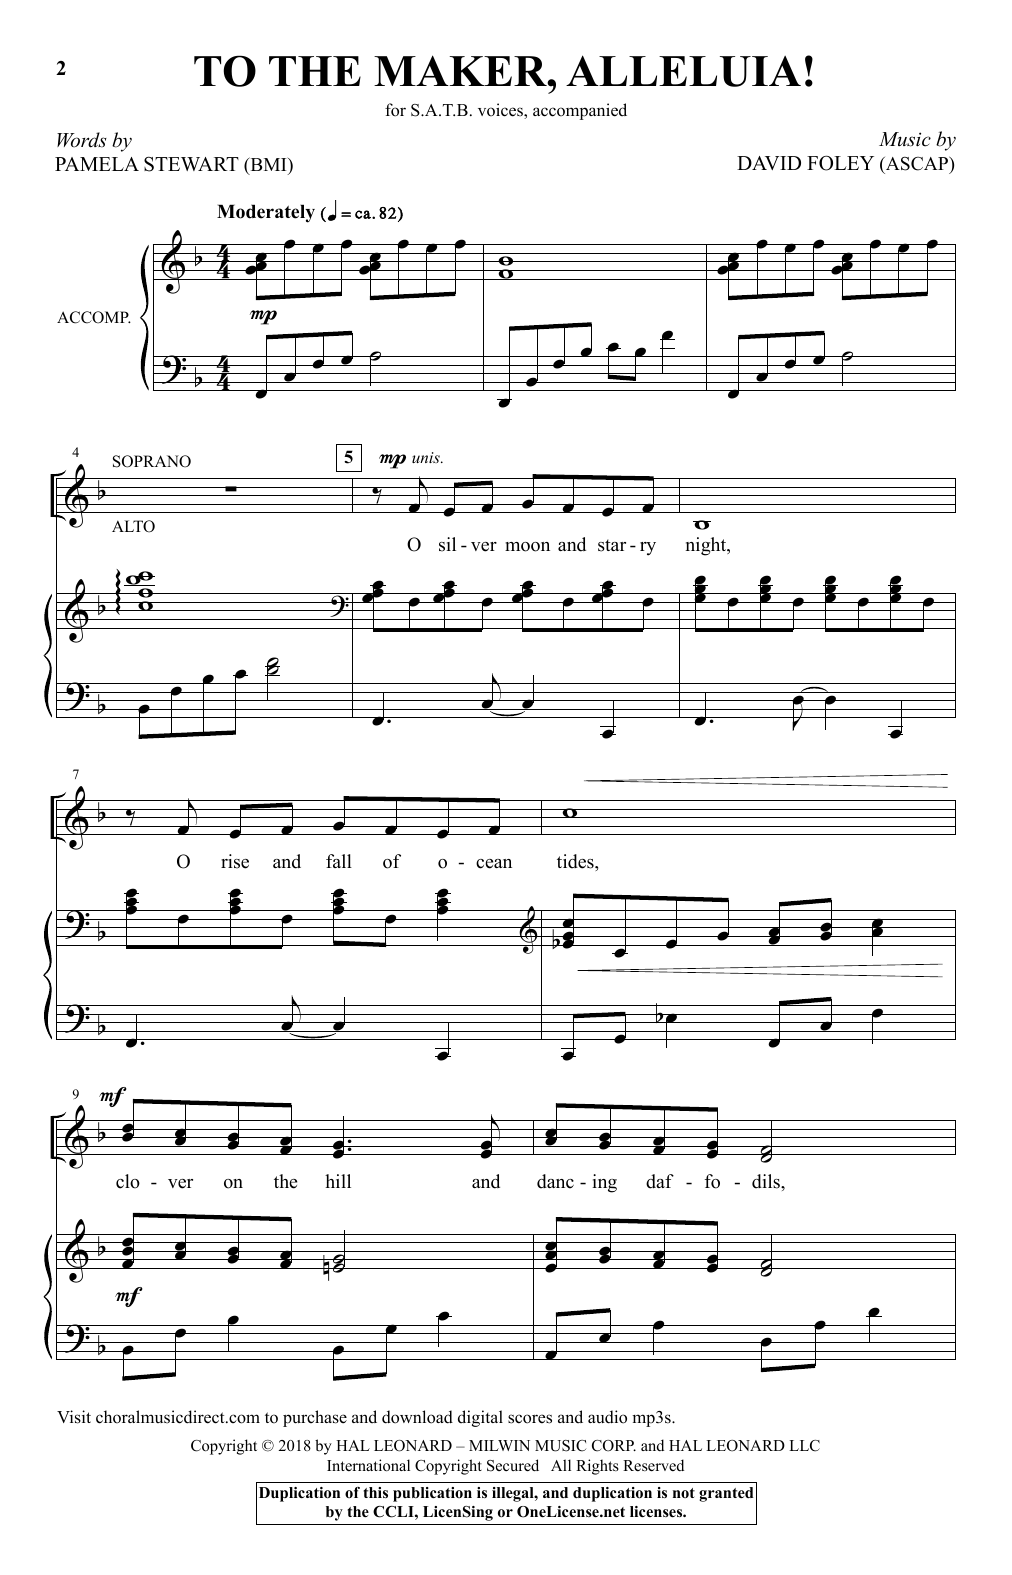 Download David Foley To The Maker, Alleluia! Sheet Music